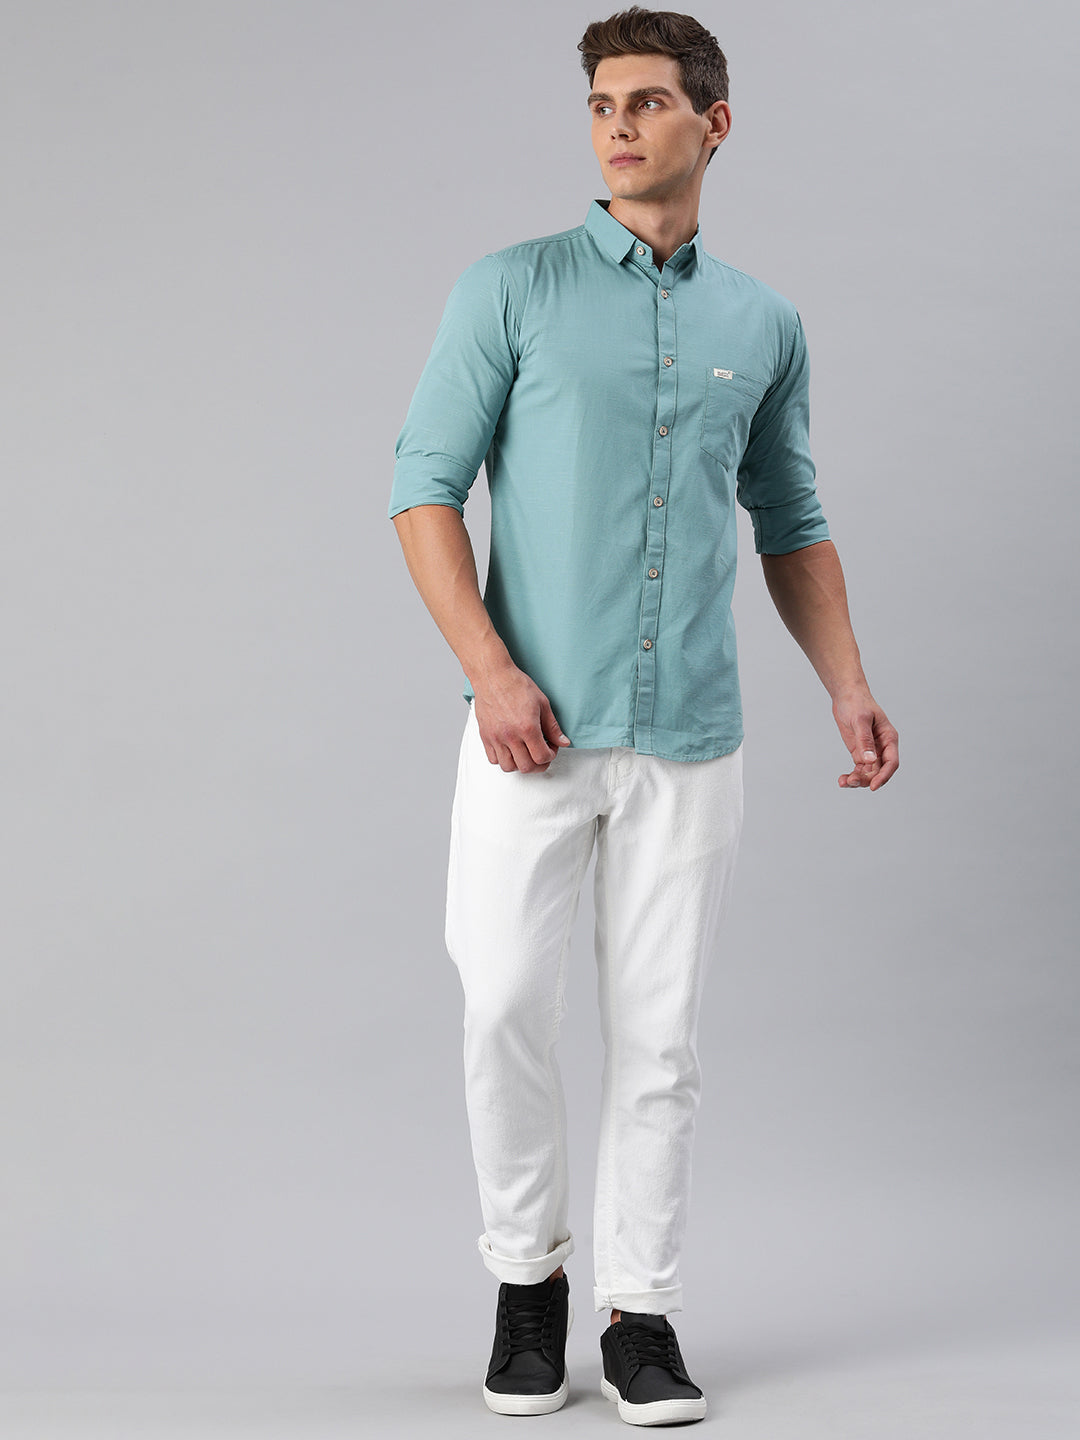 Pure Cotton Casual Men's Shirt - Dusty Teal